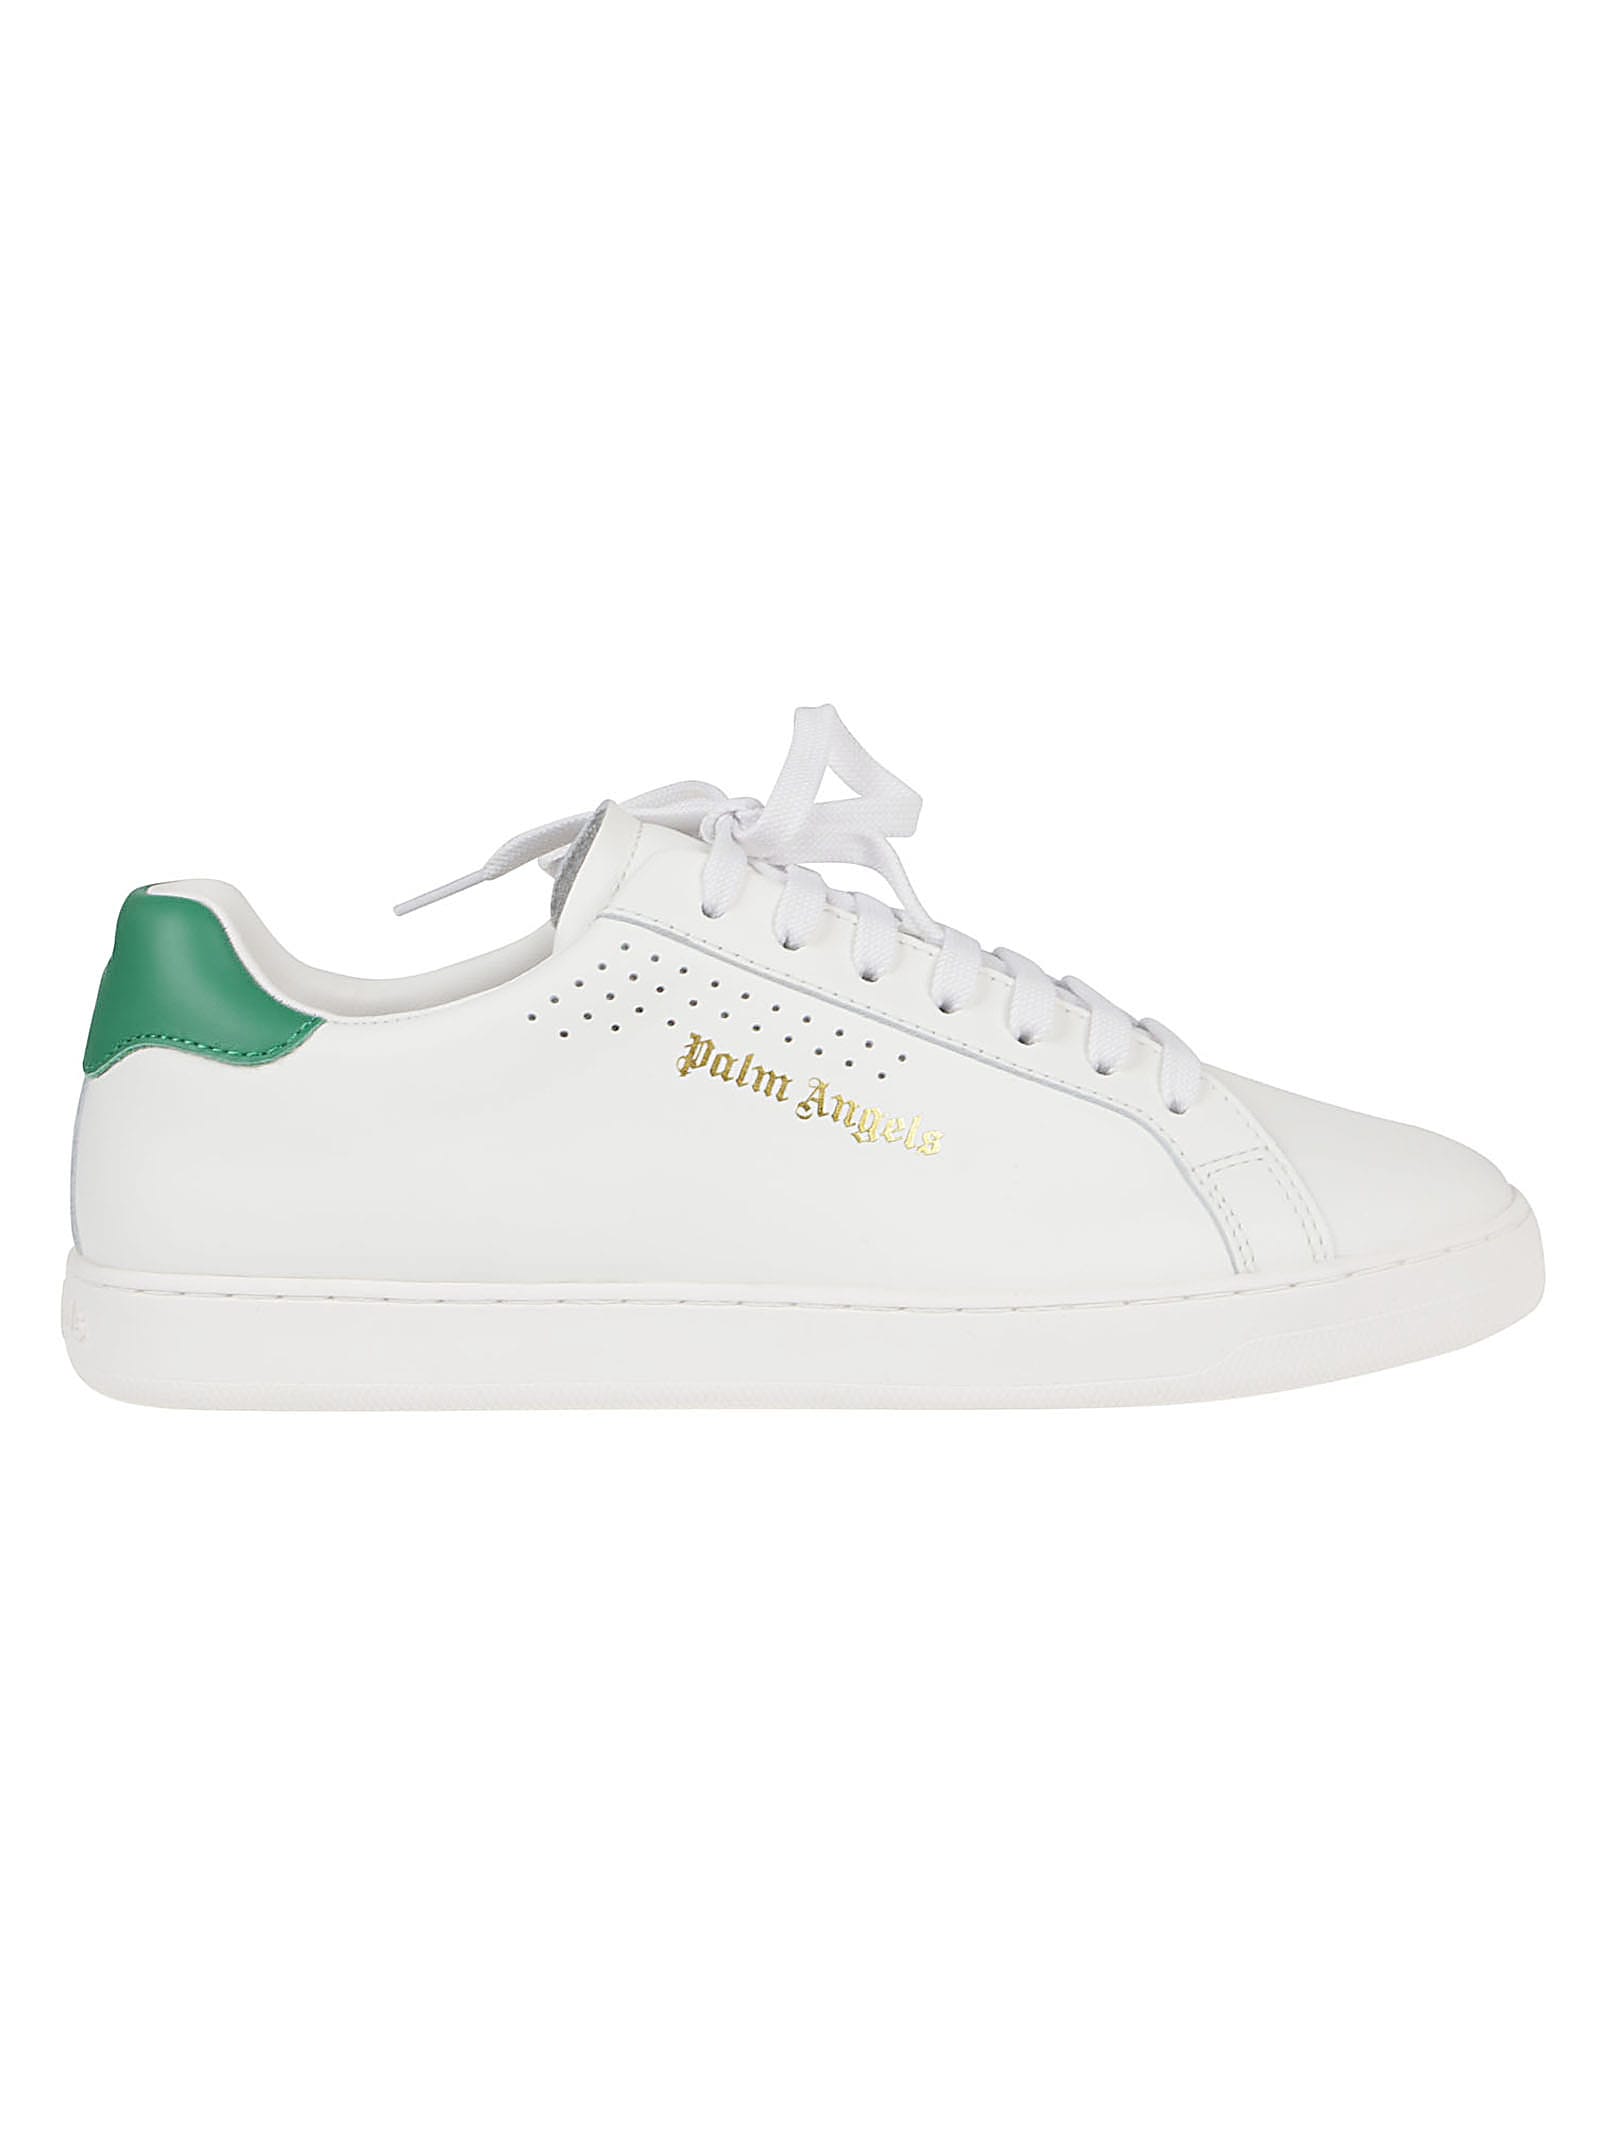 PALM ANGELS PALM ANGELS NEW TENNIS SNEAKERS,PMIA056S21LEA001 0155 WHITE GREEN